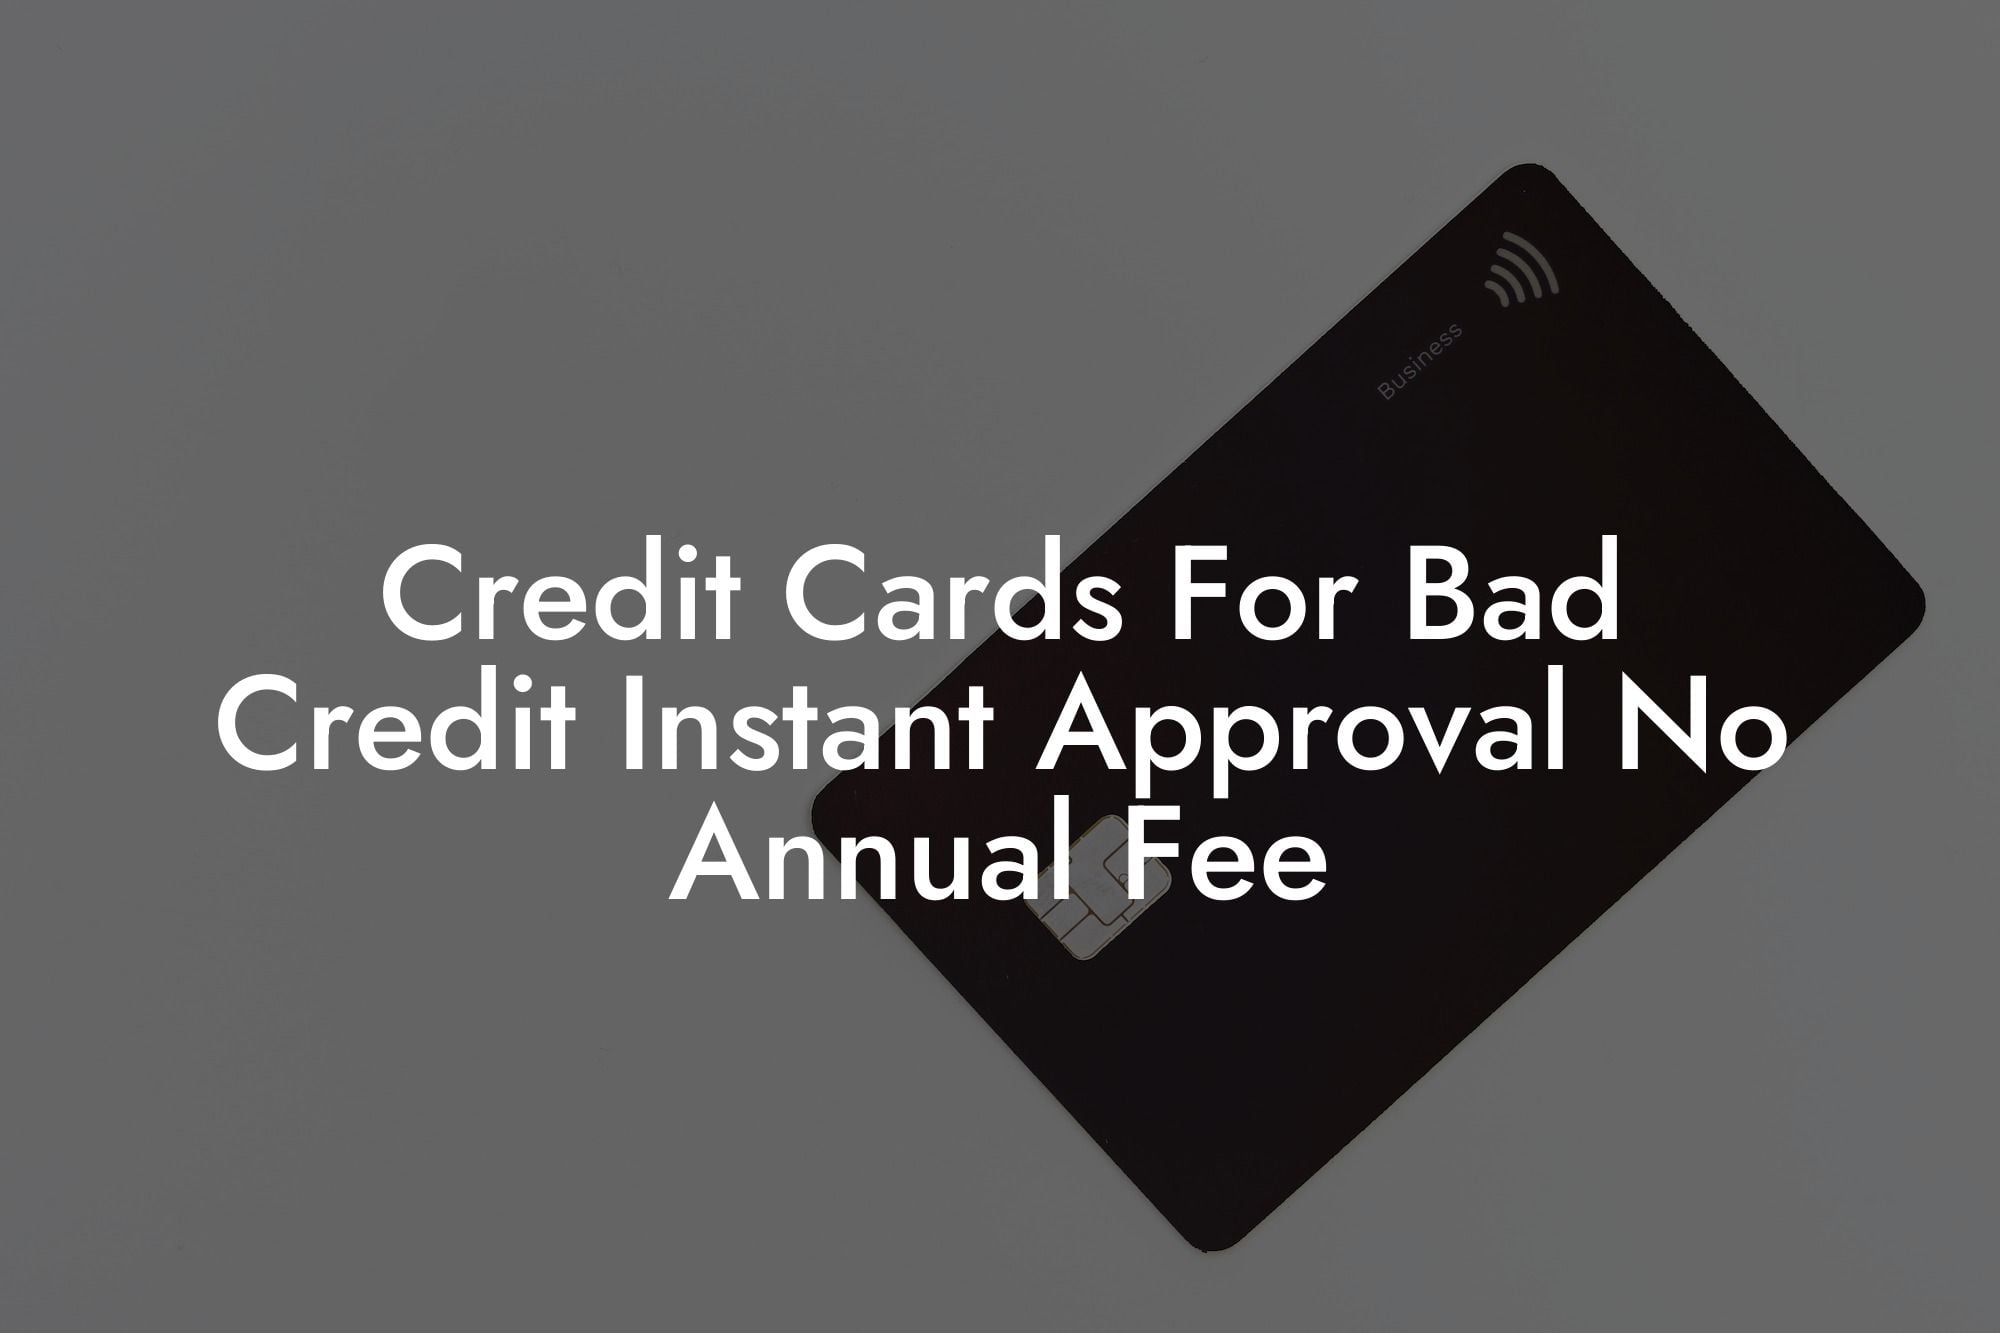 Credit Cards For Bad Credit Instant Approval No Annual Fee